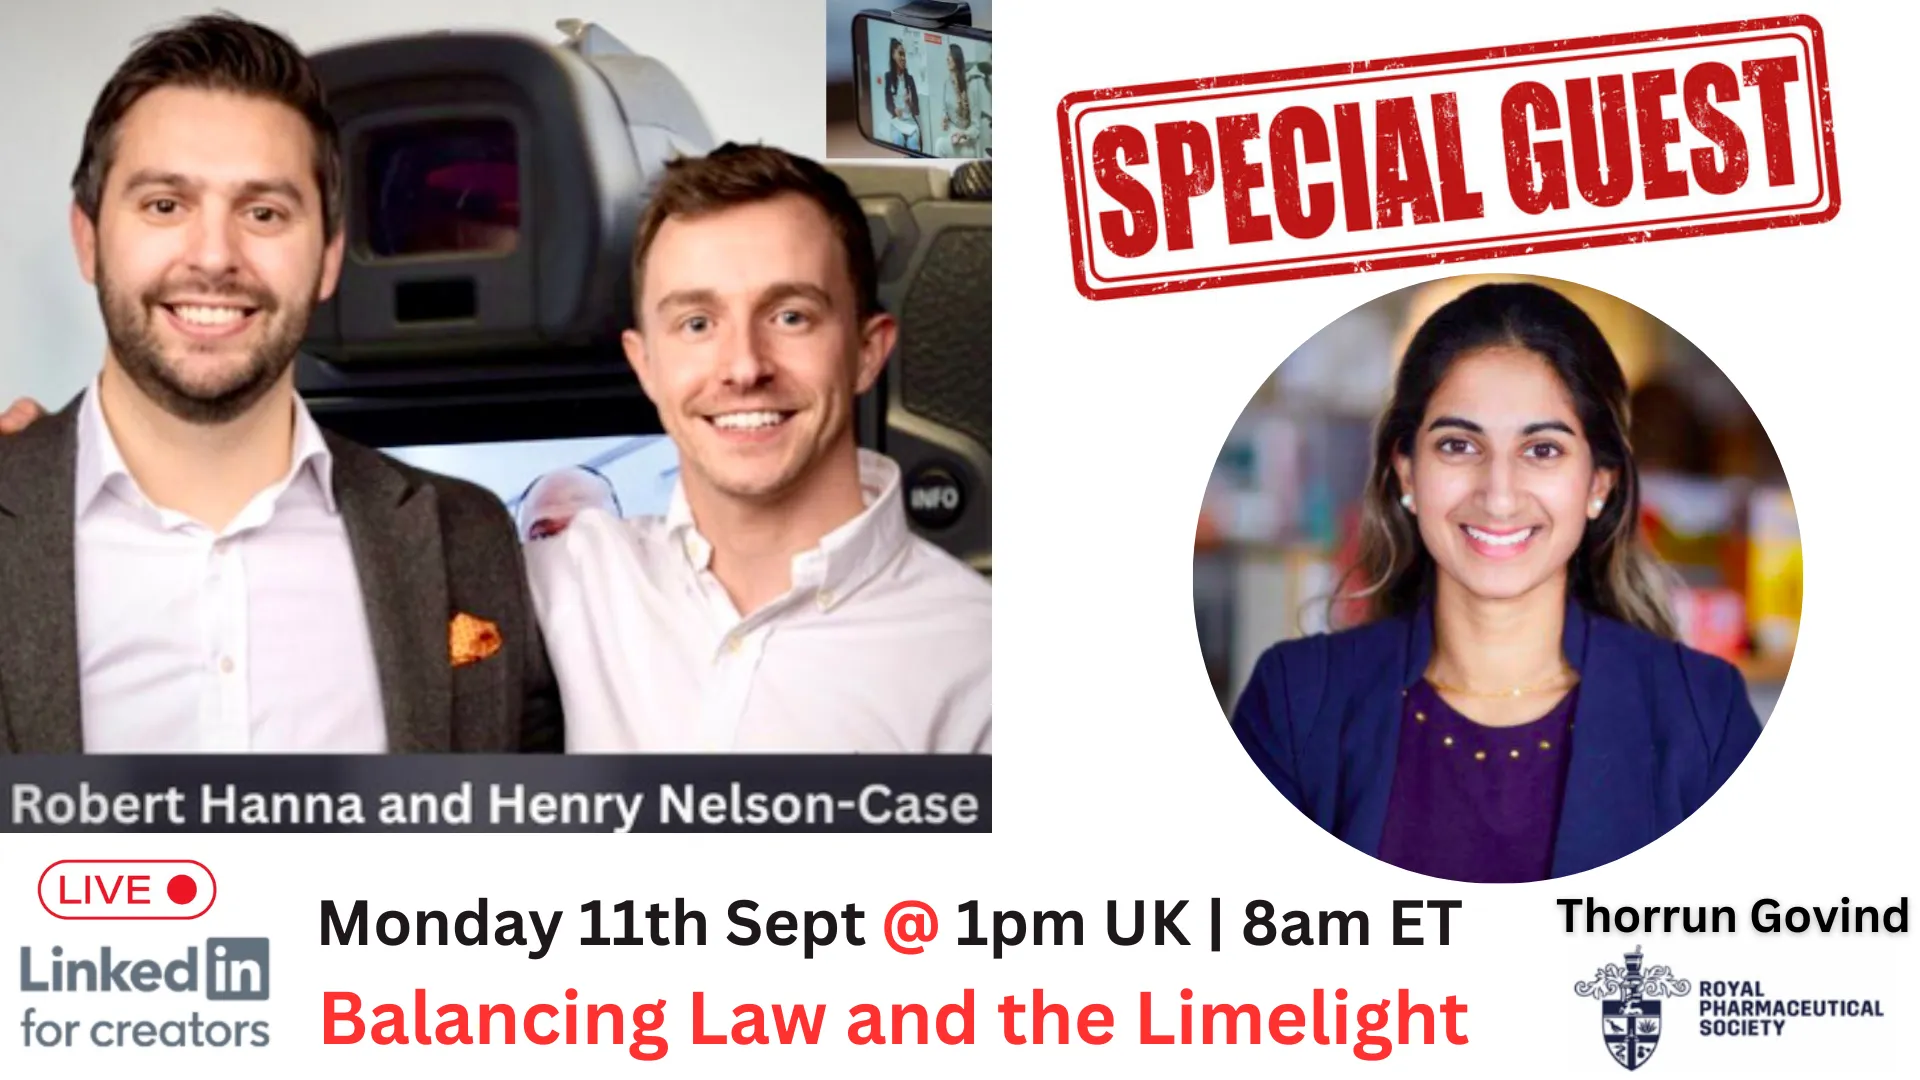 🎤 Balancing Law and the Limelight: Is it Possible?

Henry Nelson-Case and I are genuinely excited to welcome you to our next Legally Speaking Club Live. We're addressing a subject that’s top of mind for many legal professionals: how to effectively manage a successful legal career while leveraging media recognition as a powerful tool for visibility in the modern world and building trust with a wider audience.

Block out your calendar 🗓 for Monday, 7th August (1pm UK/8am ET) for an in-depth discussion with Pharmacist Thorrun. 📺😁

Thorrun is an exceptional legal mind in Healthcare Advisory and Inquest Law and a Registered Pharmacist.

What sets her apart?

She became the youngest elected Board Member of the Royal Pharmaceutical Society and subsequently assumed the role of Chair of the English Pharmacy Board in 2021. 🚀

Featured on platforms like BBC Newsnight and Sky News, Thorrun’s voice has resonated within the healthcare industry. She has been recognised with awards such as ‘Young Pharmacist of the Year’ and has made the North Power Women Future List. 🏆

👥 So, What Are We Chatting About?

Balancing legal expertise with media exposure 🤹‍♀️

Understanding the rewards and challenges of public visibility 👀

Strategies for impactful media appearances 🎙️

Leveraging social media for professional advocacy 📱

... and much more that's pertinent for lawyers looking to amplify their brand and client base.

🗨️ Have Questions? Be Ready.

We'll initiate the dialogue with Thorrun and then open the floor for your questions. Let's make this a substantive conversation that can help guide your media and PR strategies in the legal sector. 🎤

If you're a legal professional seeking to boost market recognition, attract more clients, and master the interplay between professionalism and publicity, this is a must-attend event.

Share this post and tag 2 people from your network who would get value from joining us.

See you there: https://discord.gg/Q5fYjNpxkE📣

#LegalInnovation #MediaForLawyers #CareerDevelopment #TrustBuilding #ModernLawyer